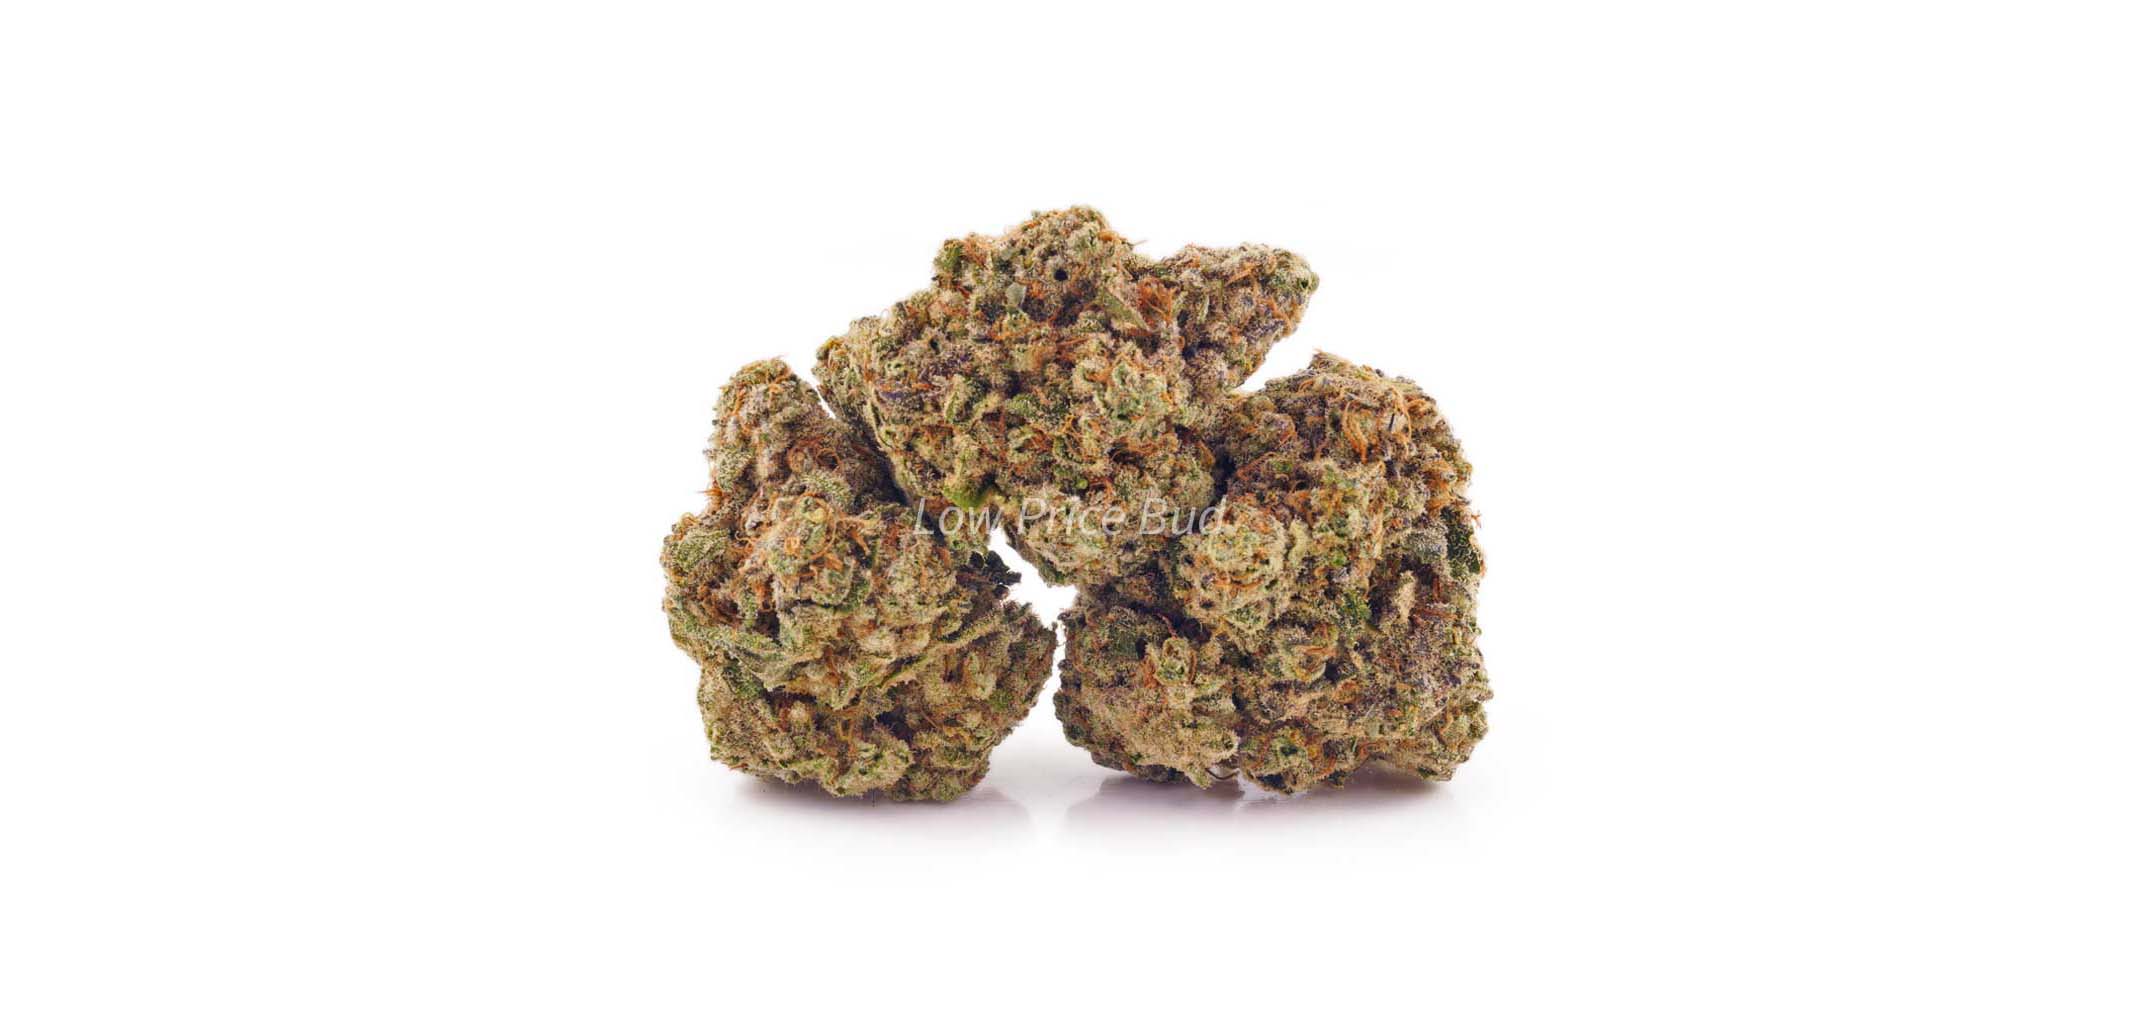 Lemon Meringue value buds at mail order marijuana dispensary for value buds and cheapweed. BC cannabis weed store Low Price Bud. buy weed.